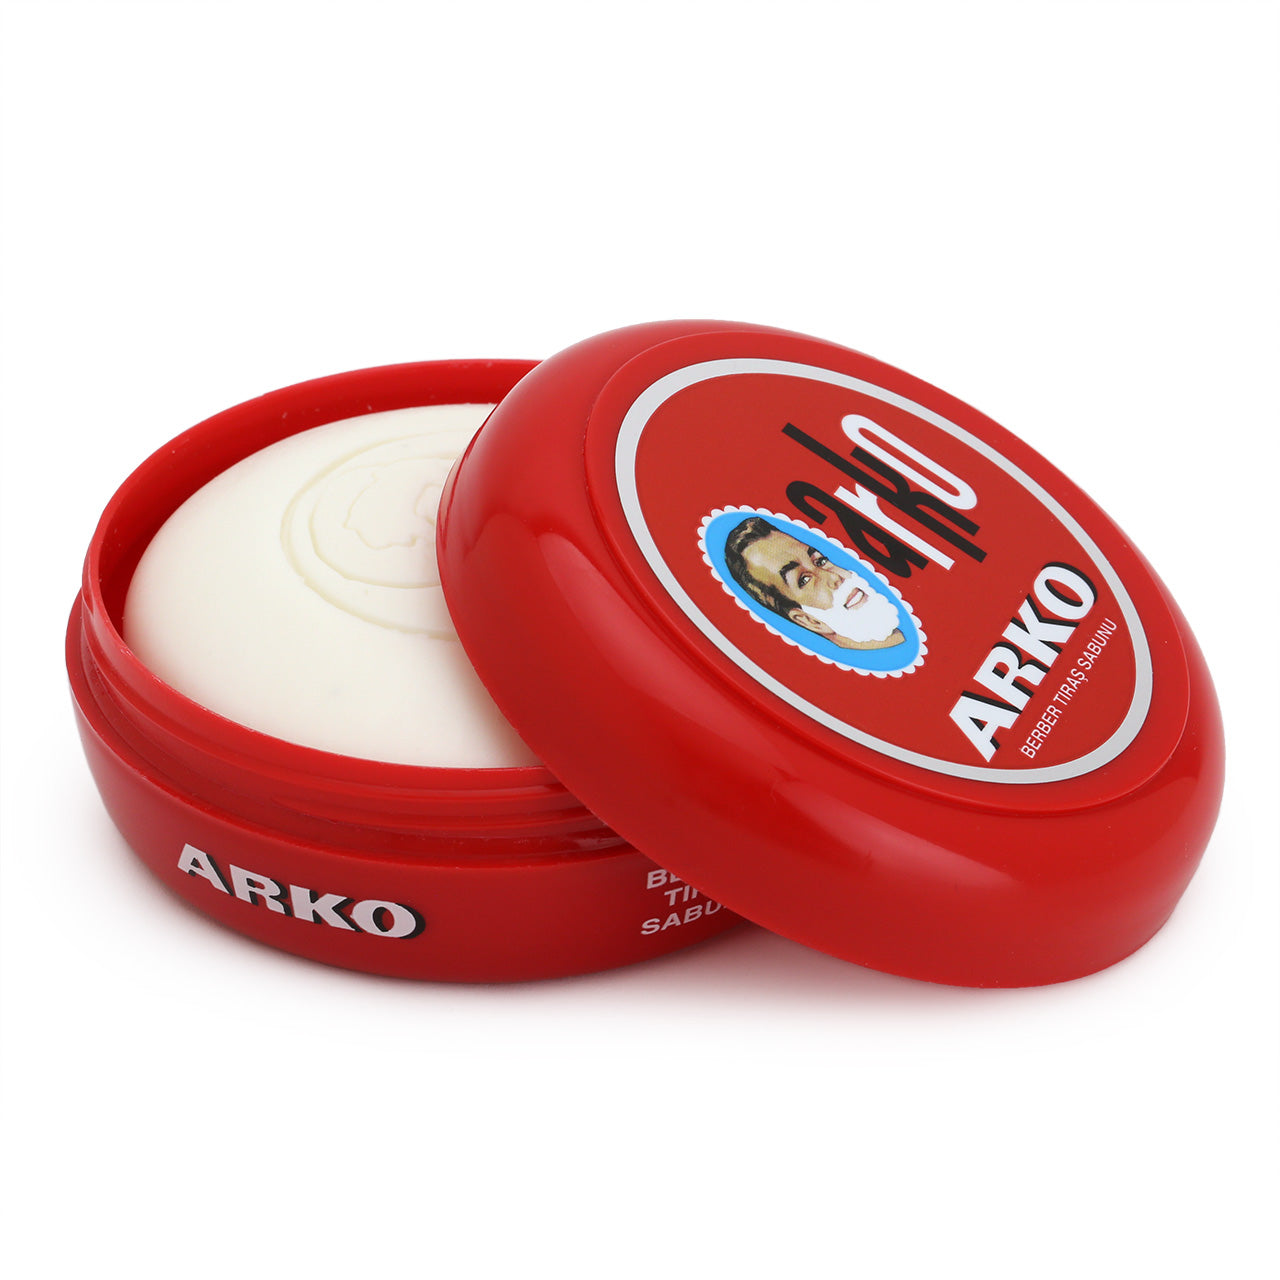 Arko Shave Soap  showing the top label's lathered man's face in retro styling